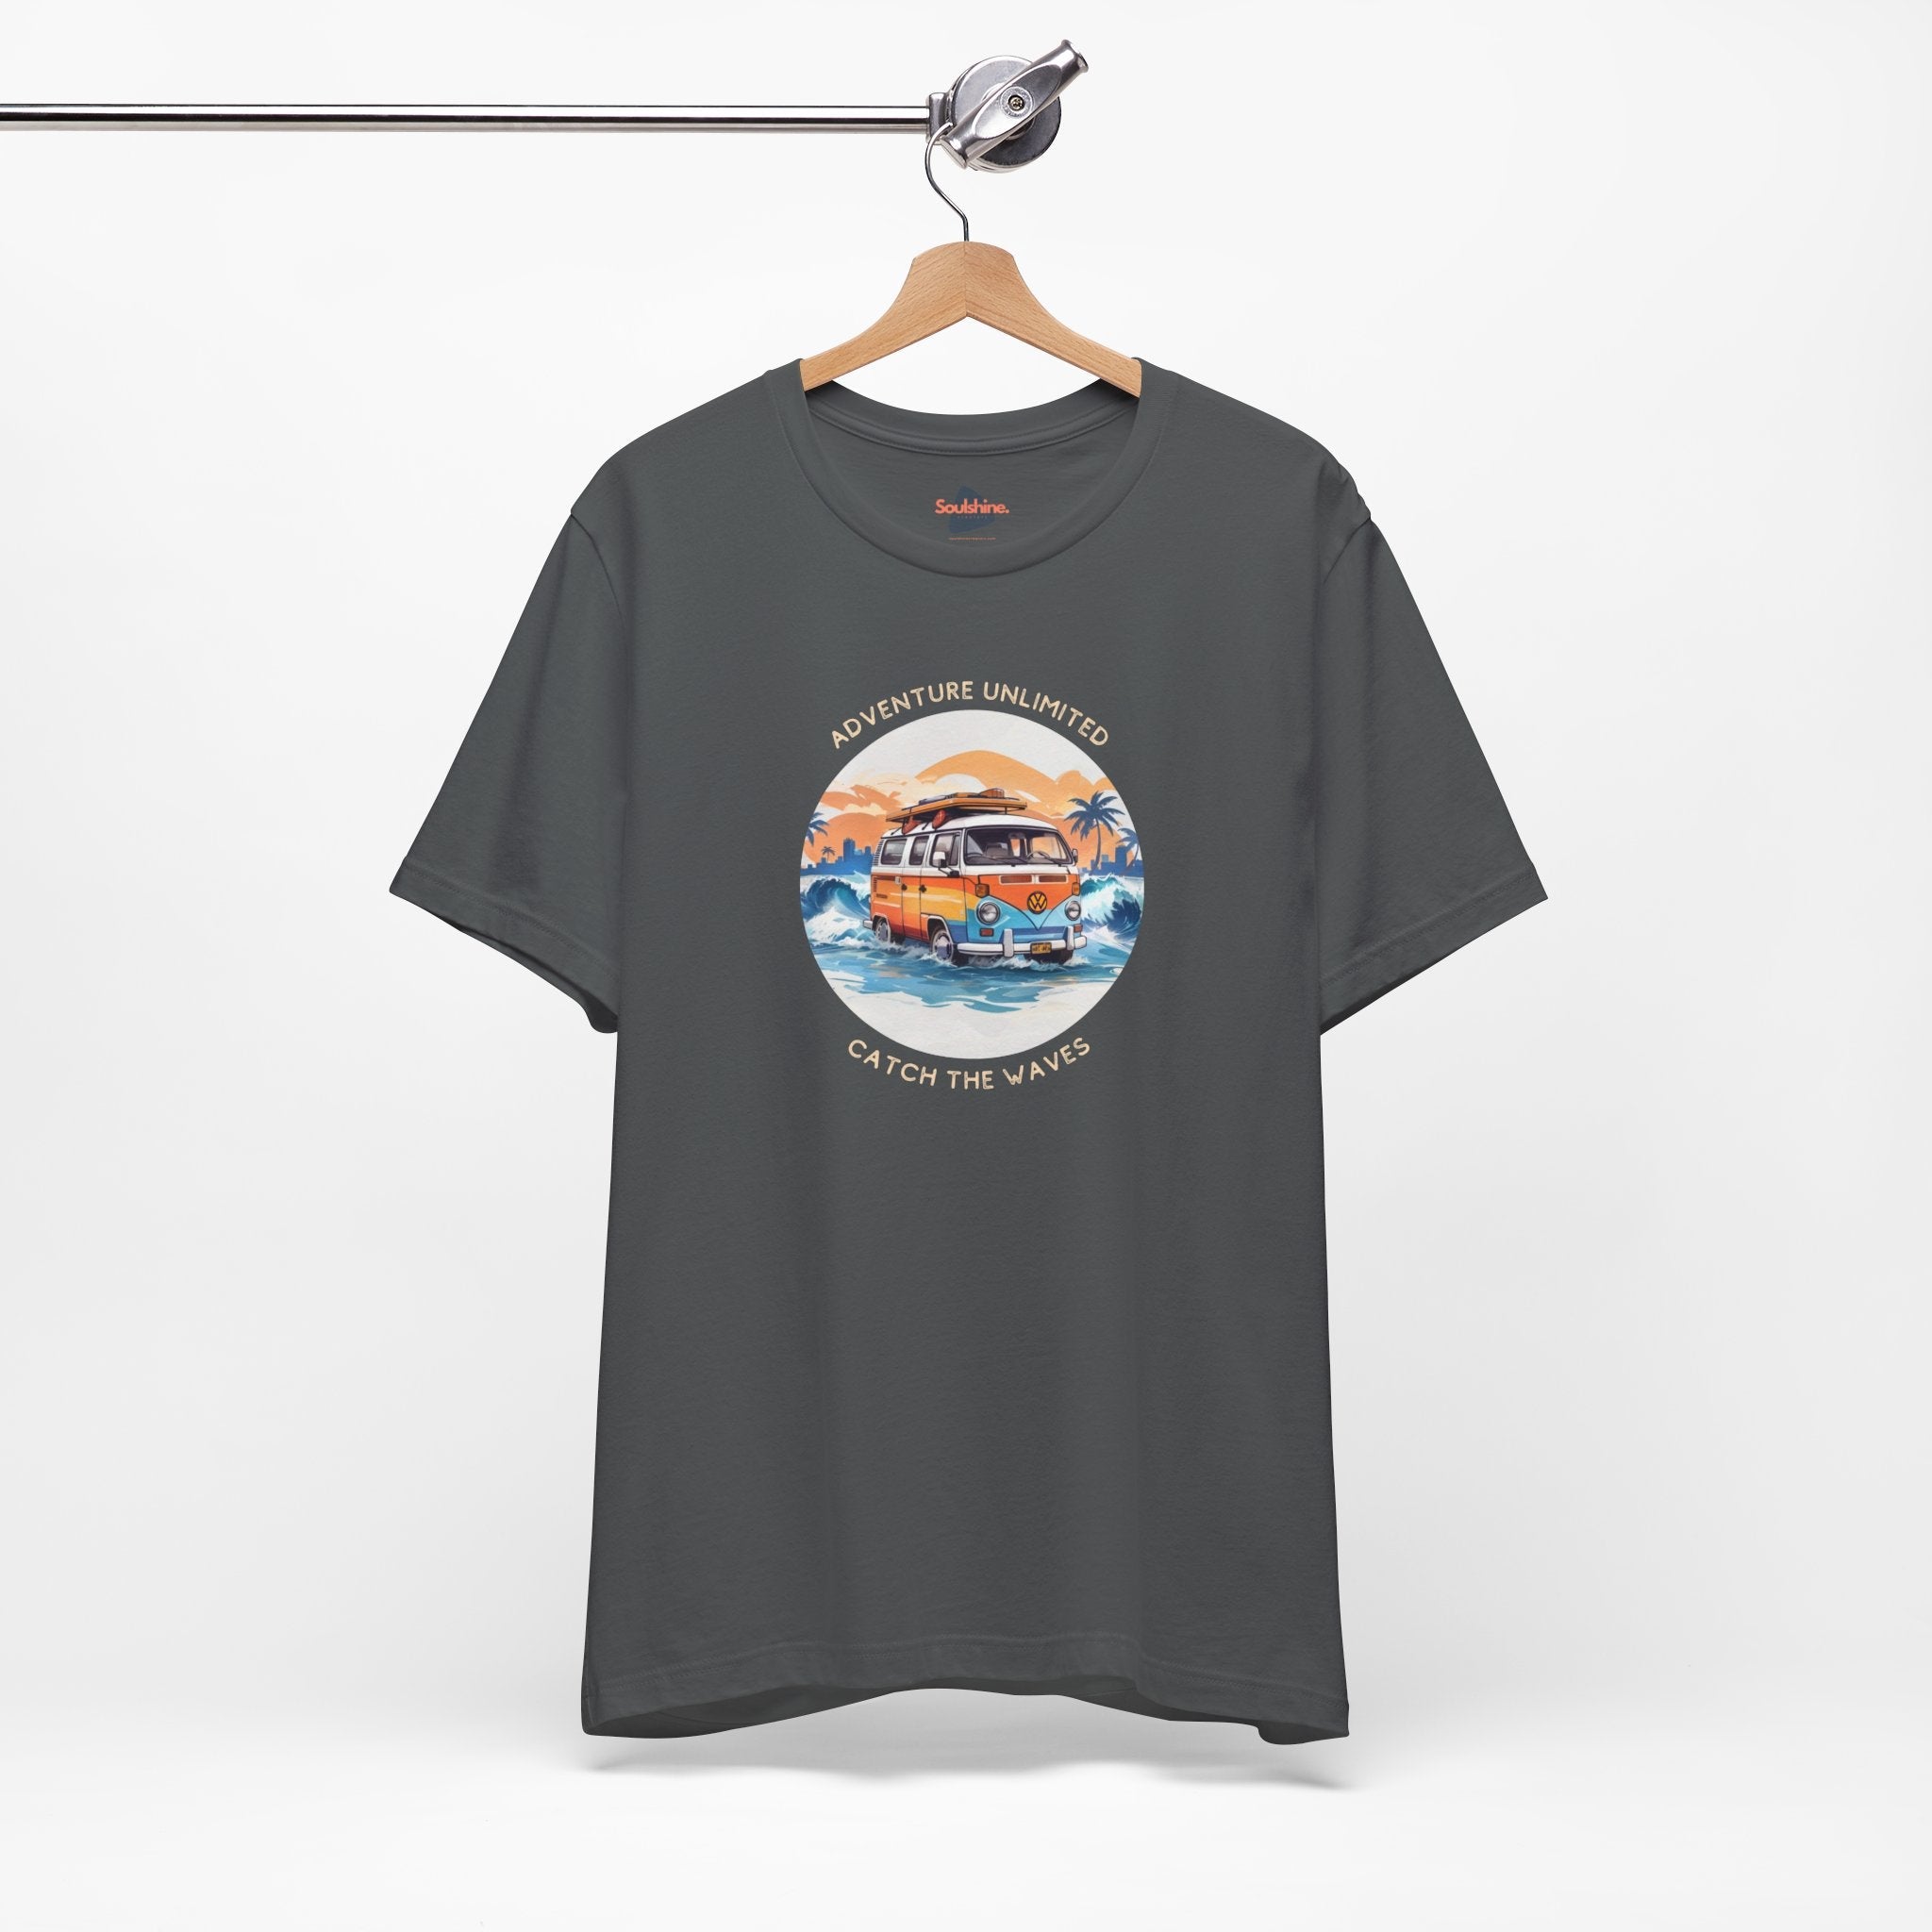 Adventure Unlimited printed boat design on grey t-shirt_Item US, Direct-to-garment_Unisex Jersey Tee